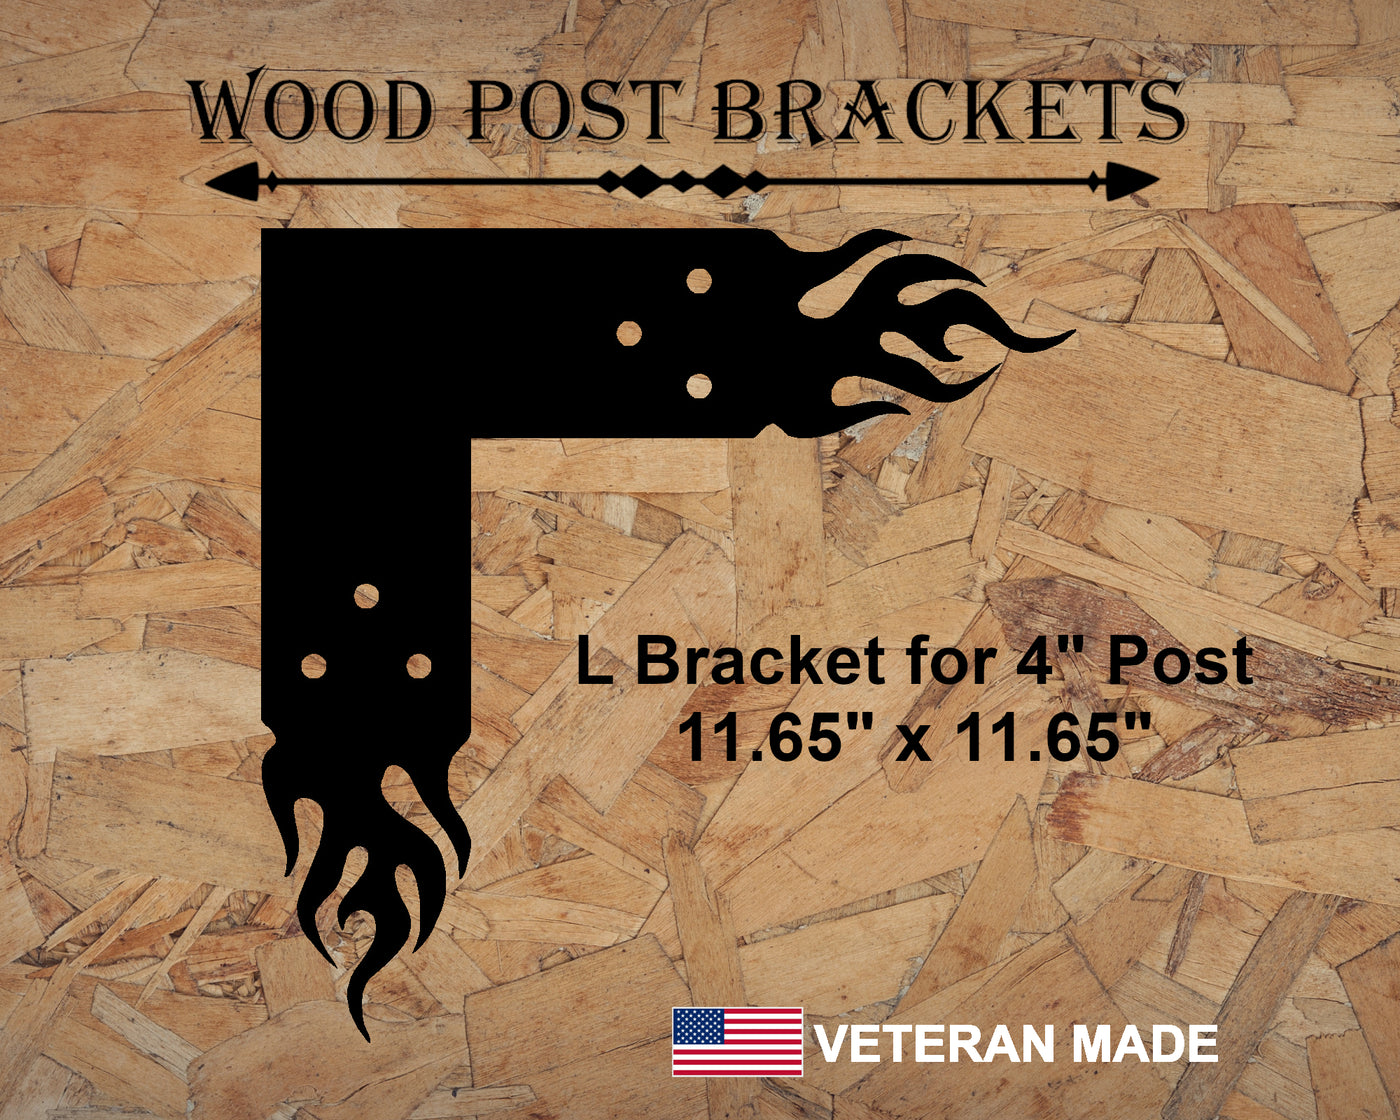 Flaming Brackets For 4x4 Dimensional Lumber - Madison Iron and Wood - Brackets - metal outdoor decor - Steel deocrations - american made products - veteran owned business products - fencing decorations - fencing supplies - custom wall decorations - personalized wall signs - steel - decorative post caps - steel post caps - metal post caps - brackets - structural brackets - home improvement - easter - easter decorations - easter gift - easter yard decor